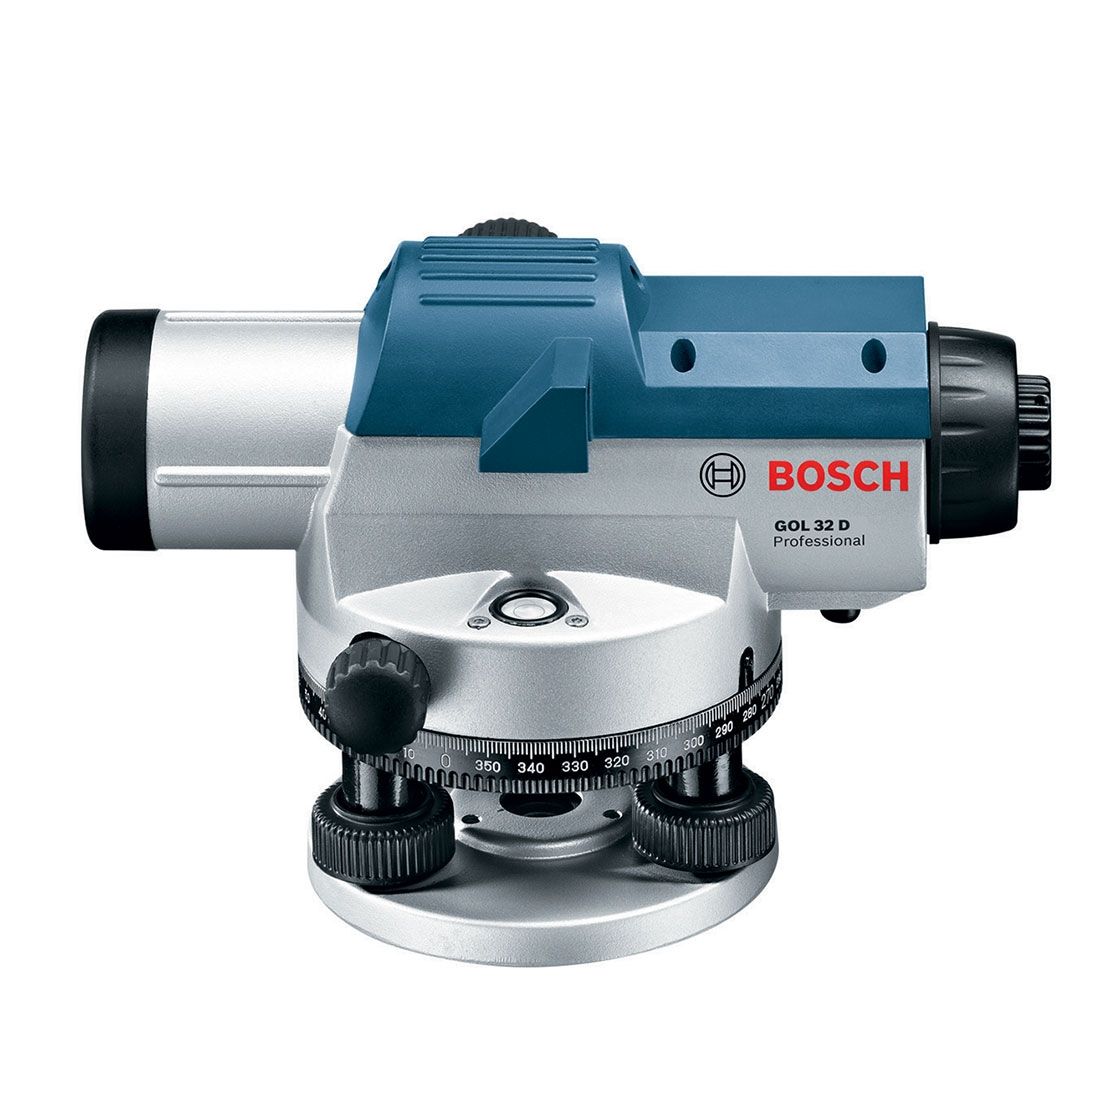 Bosch Professional GOL 32 D Professional Optical Level 0601068500 Power Tool Services